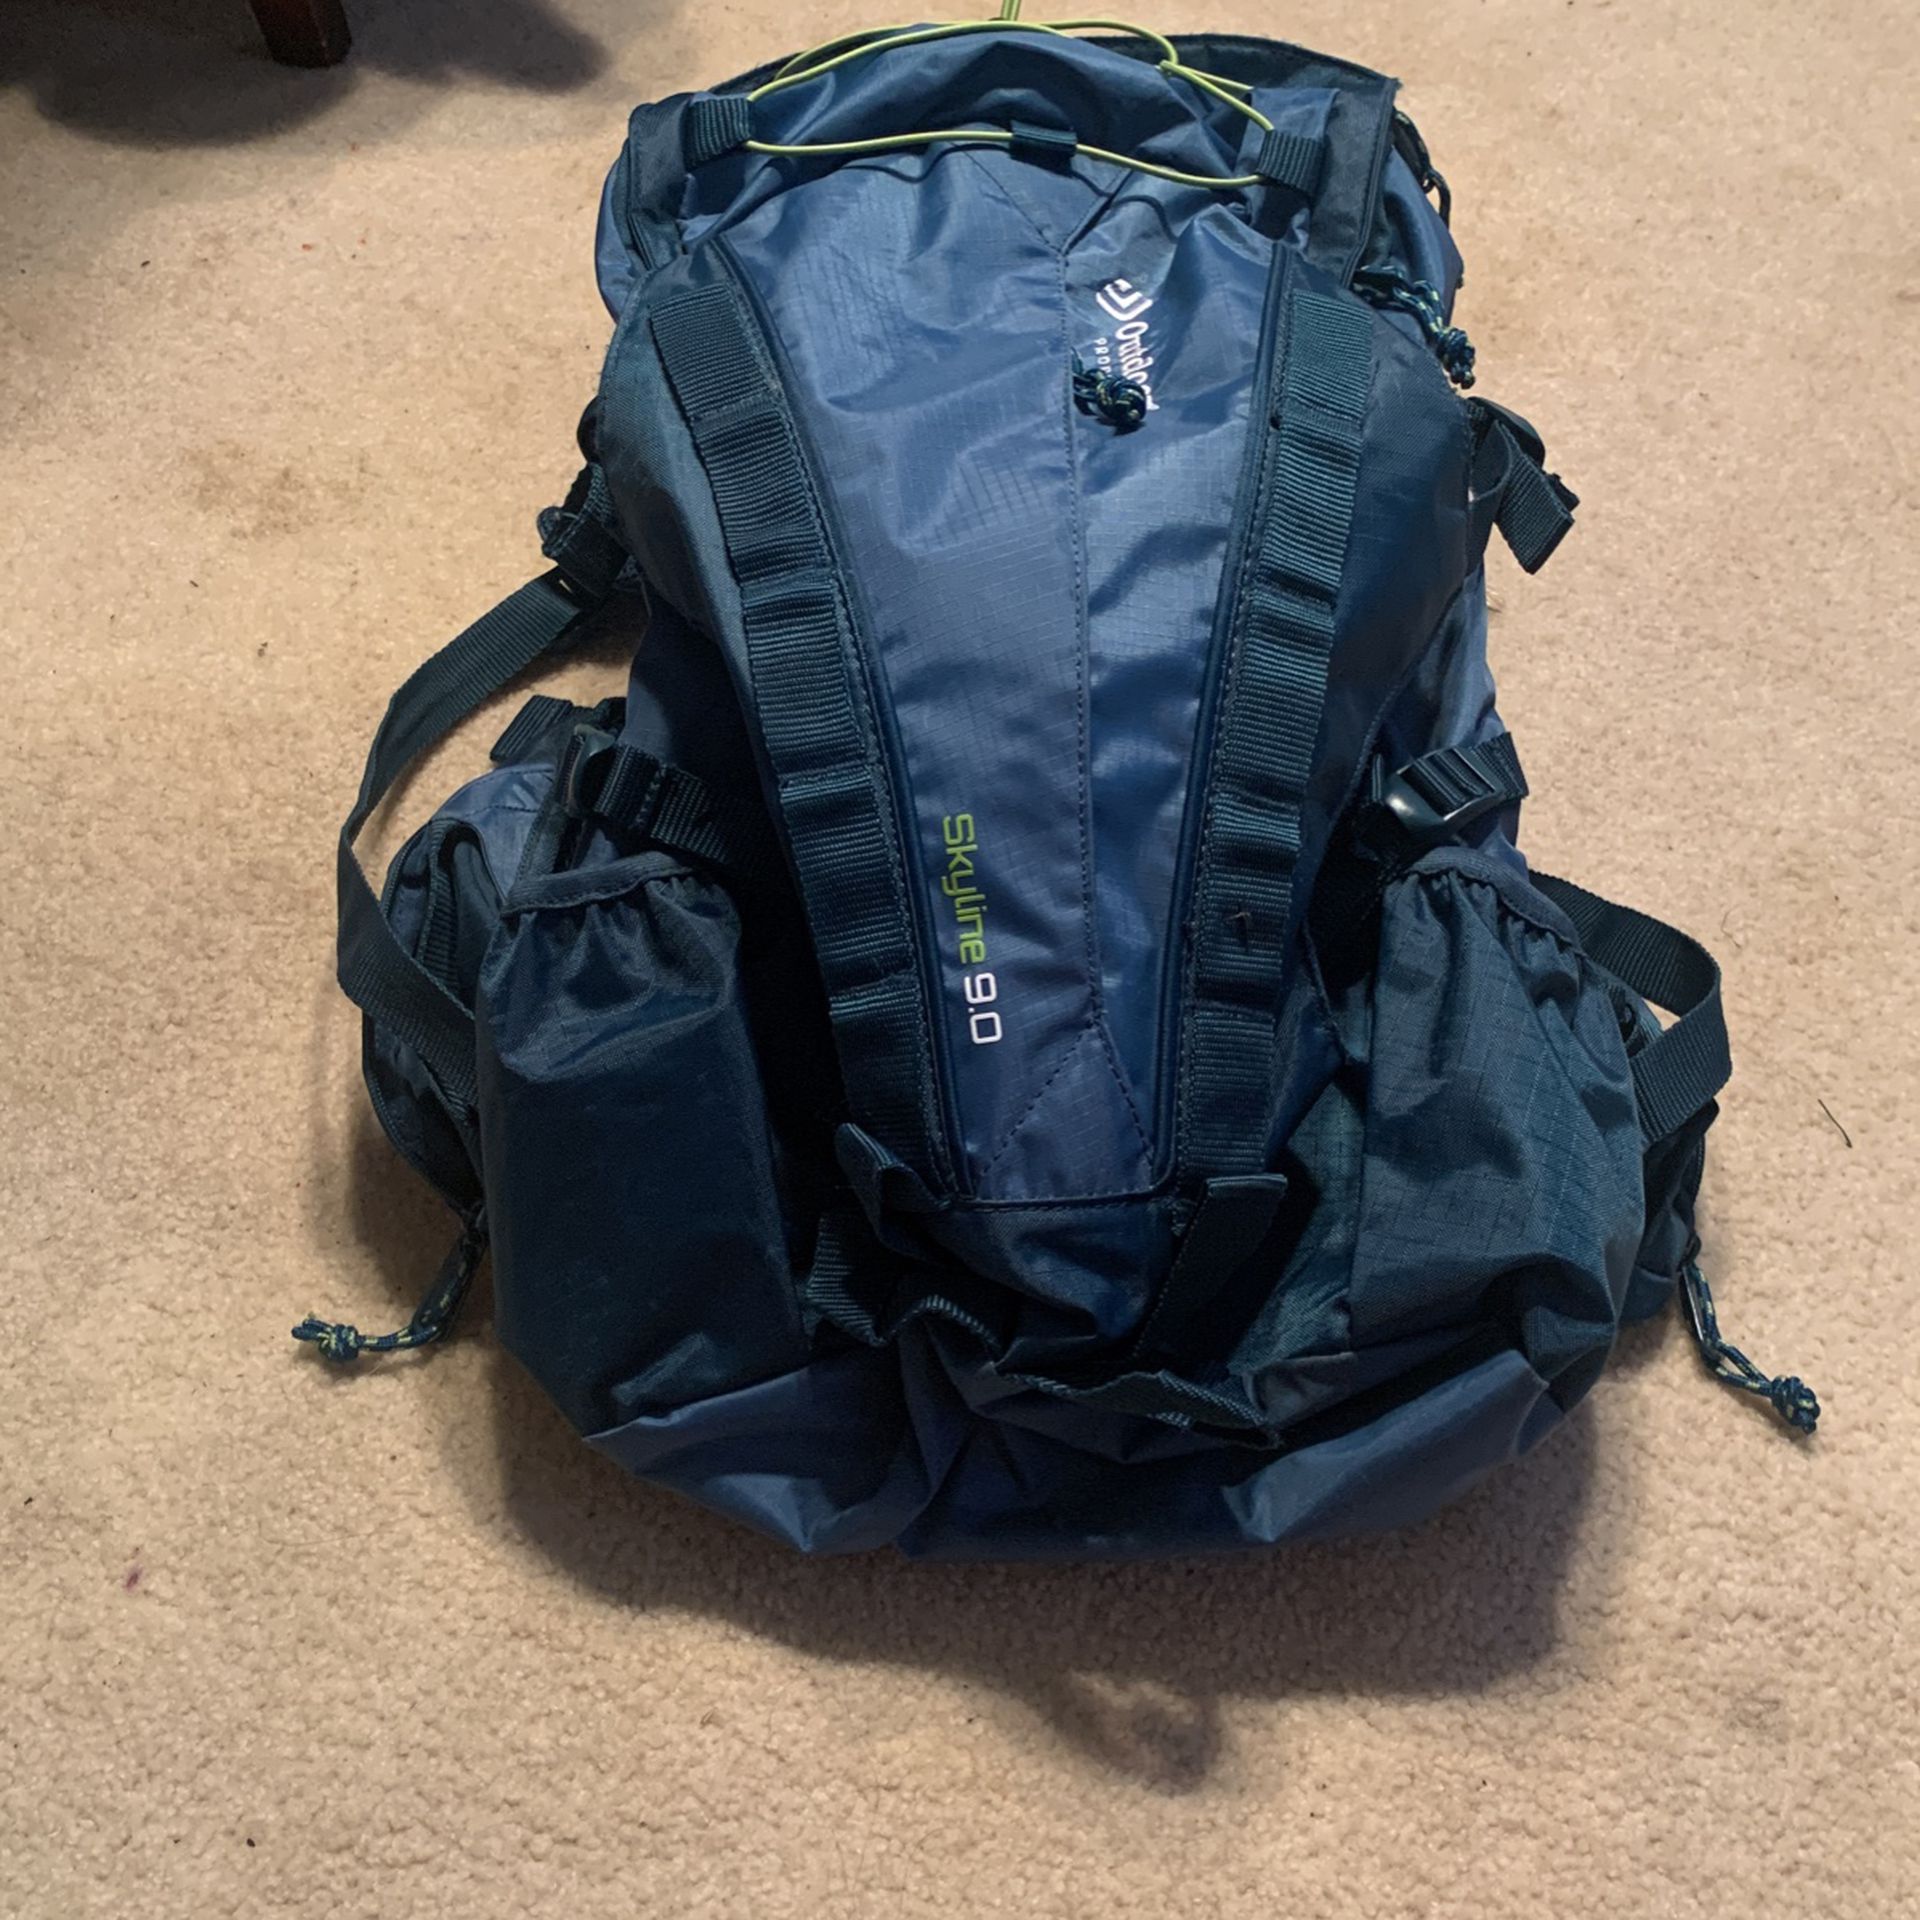 Outdoor Product Skyline 9.0 Hiking Pack 